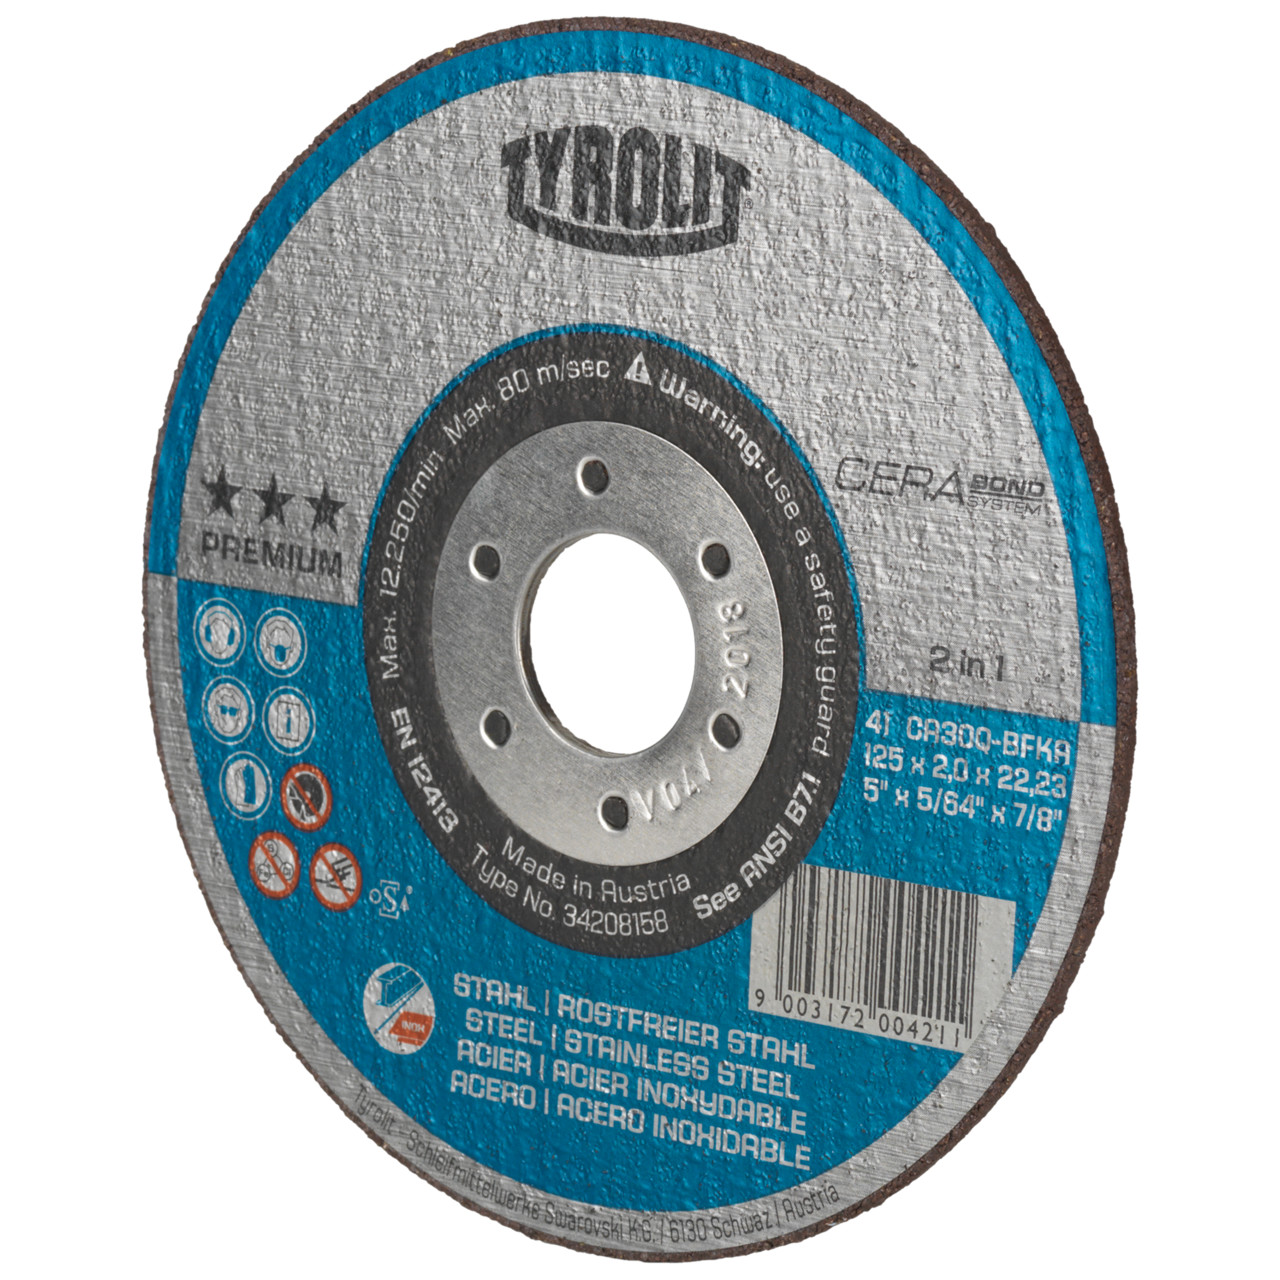 TYROLIT CERABOND Cutting disc DxDxH 115x1.6x22.23 2in1 for steel and stainless steel, shape: 41 - straight version, Art. 34256157